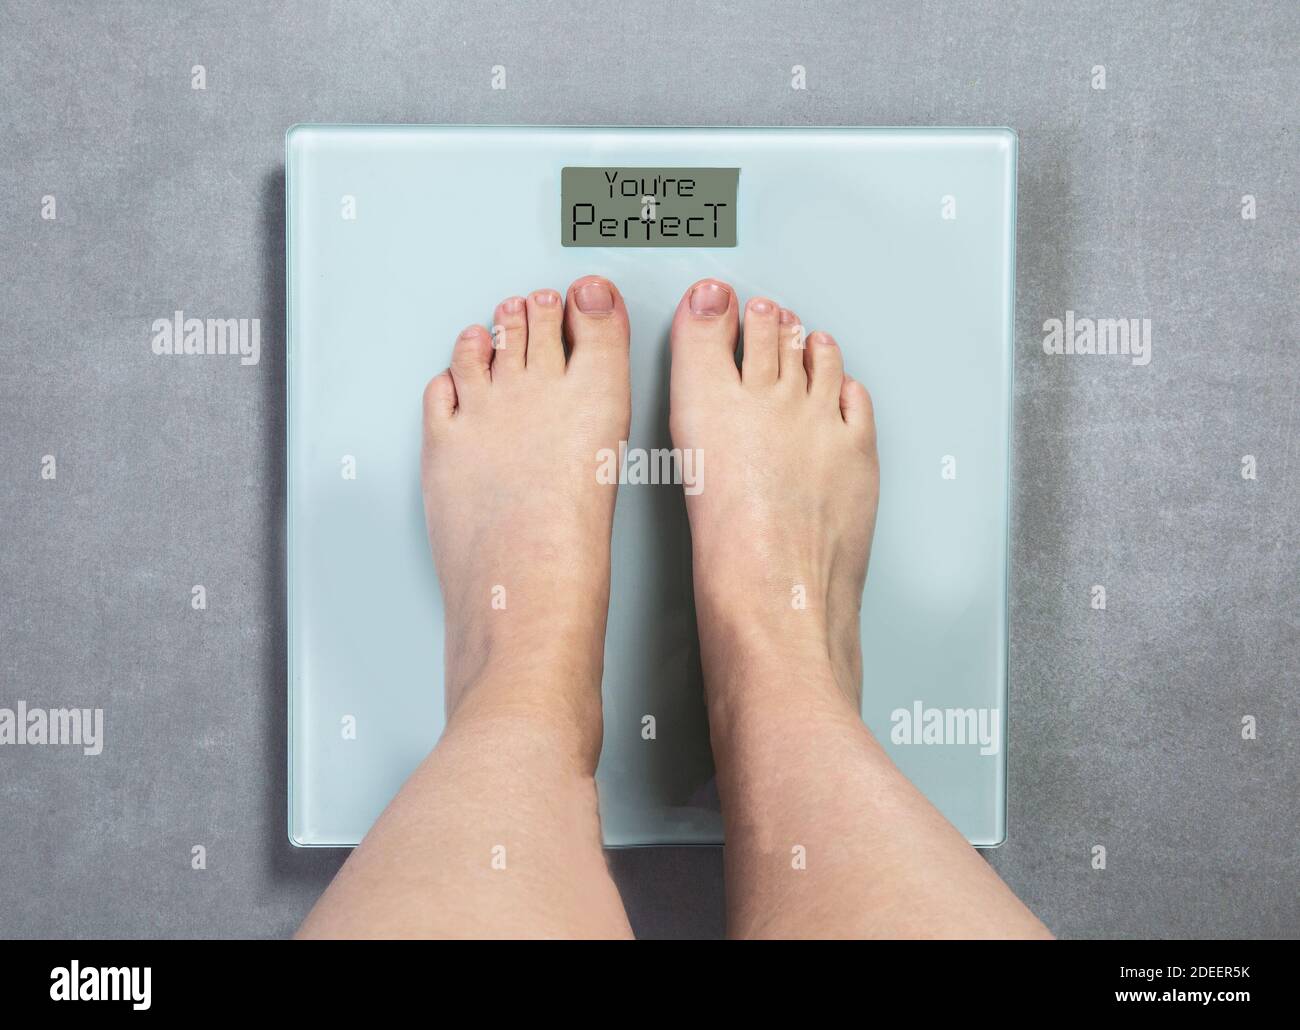 Human Foot On Weighing Scale Stock Photo - Alamy